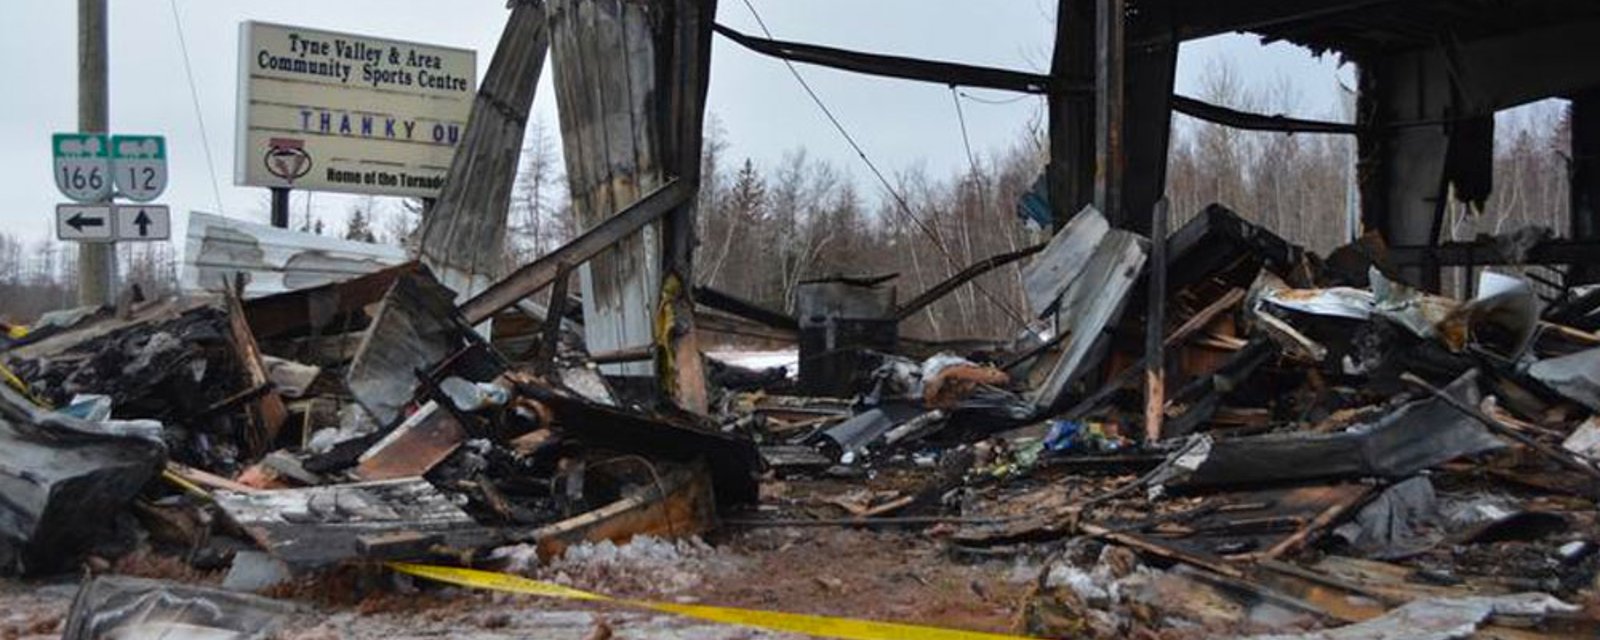 Nova Scotia town withdraws from Hockeyville contest to support rival town’s bid after their arena burns to the ground